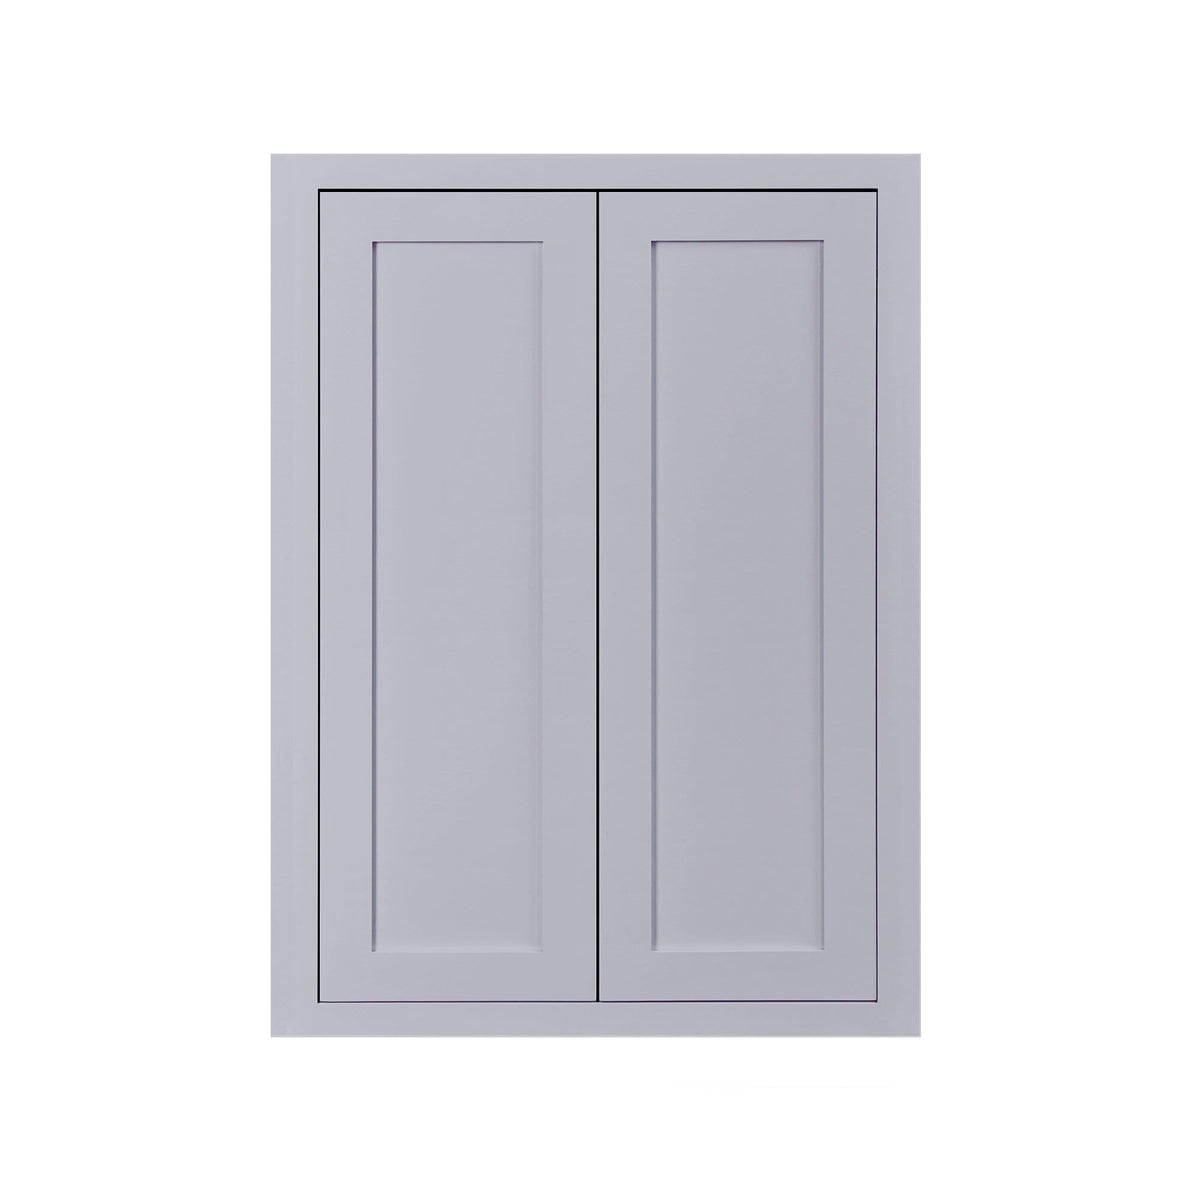 30" Tall Light Gray Inset Shaker Wall Cabinet - Double Door - 27" Wide